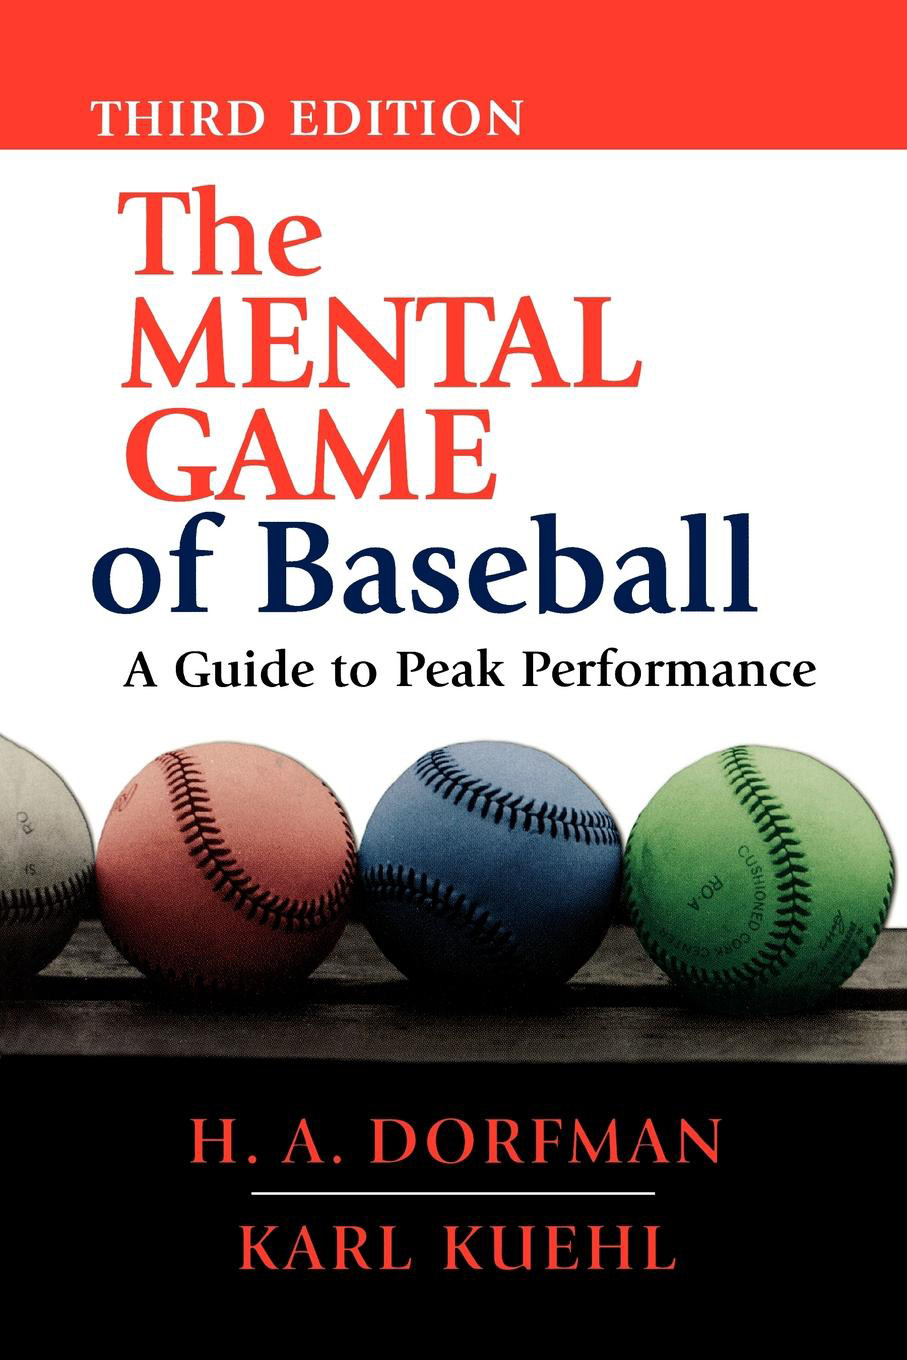 Harvey Dorfman and Karl Kuehl's 1989 book has been widely read by players in the major leagues. 